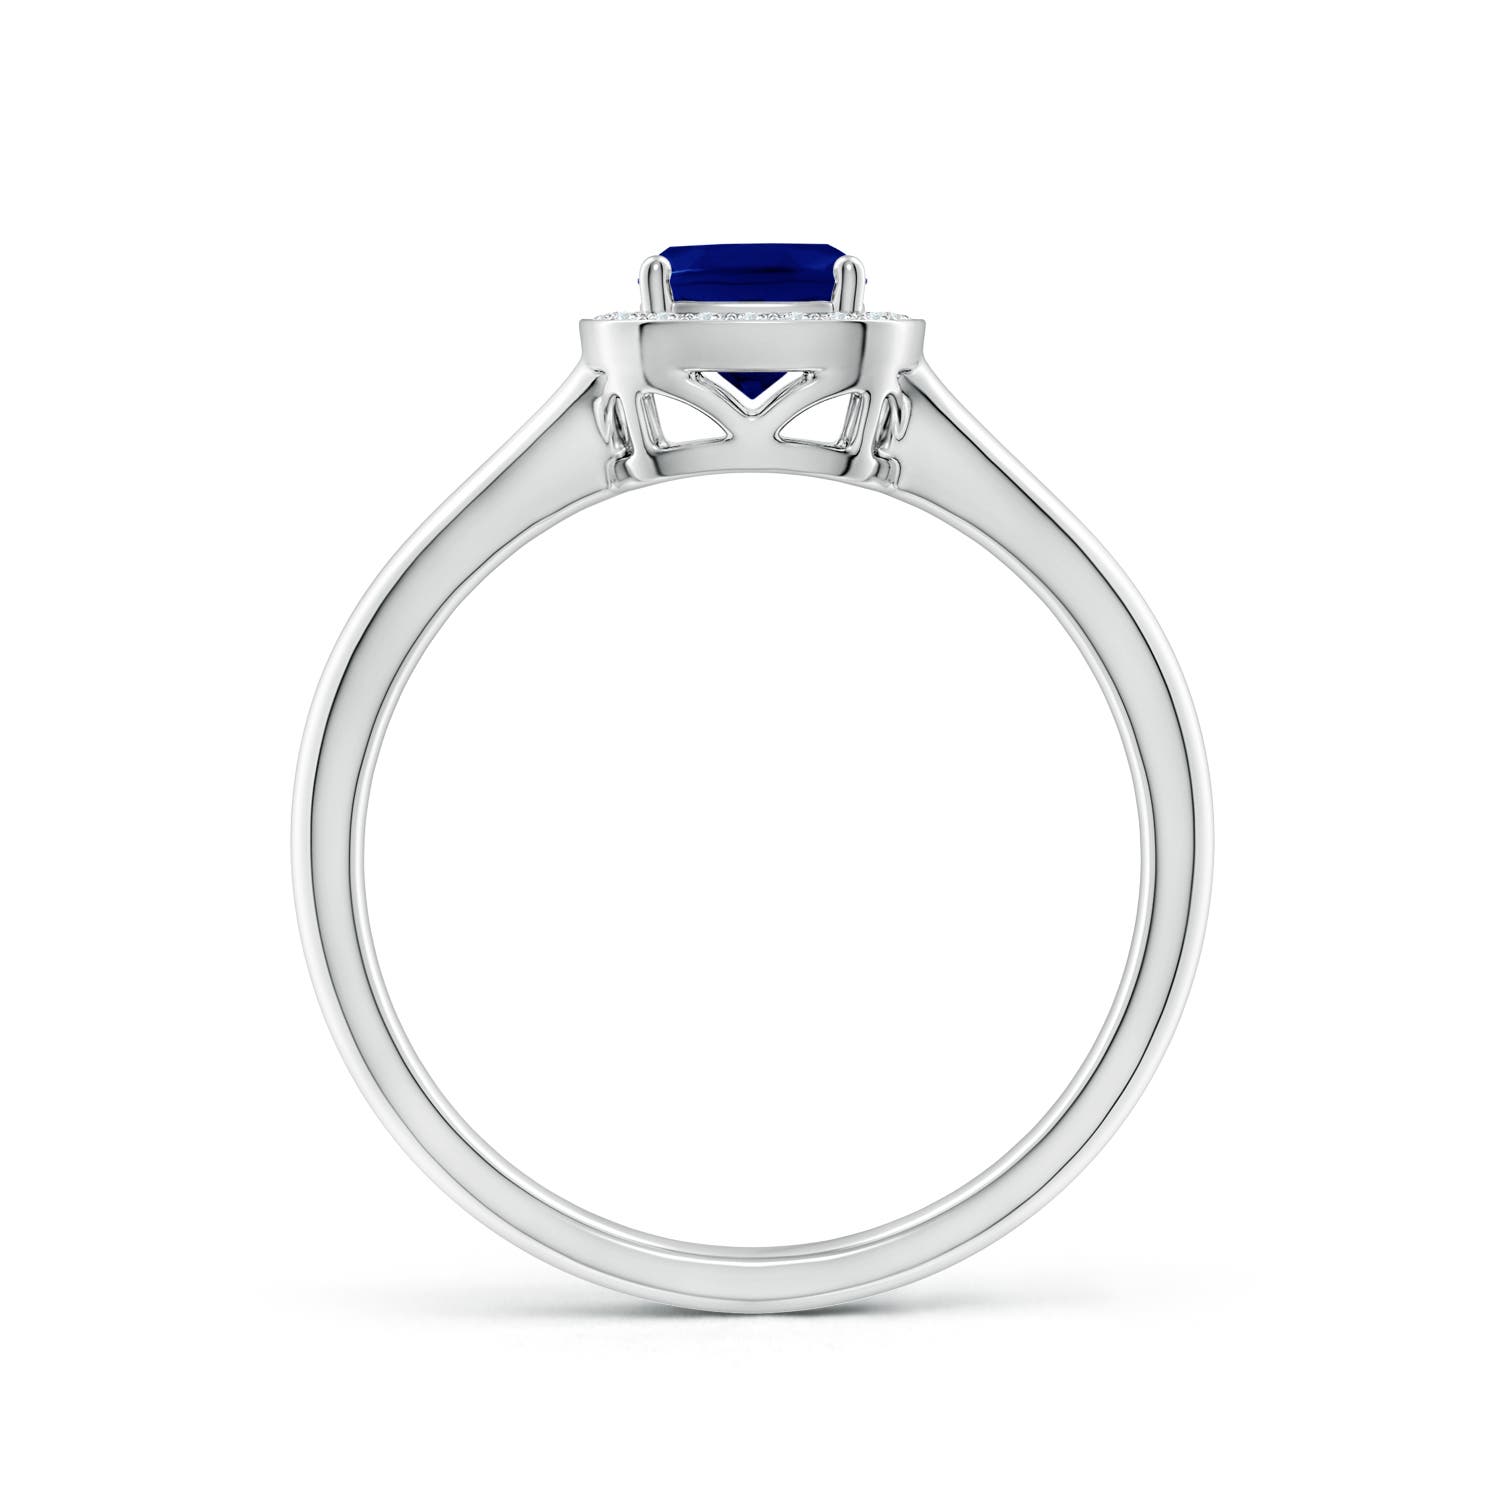 AAA - Blue Sapphire / 0.42 CT / 14 KT White Gold